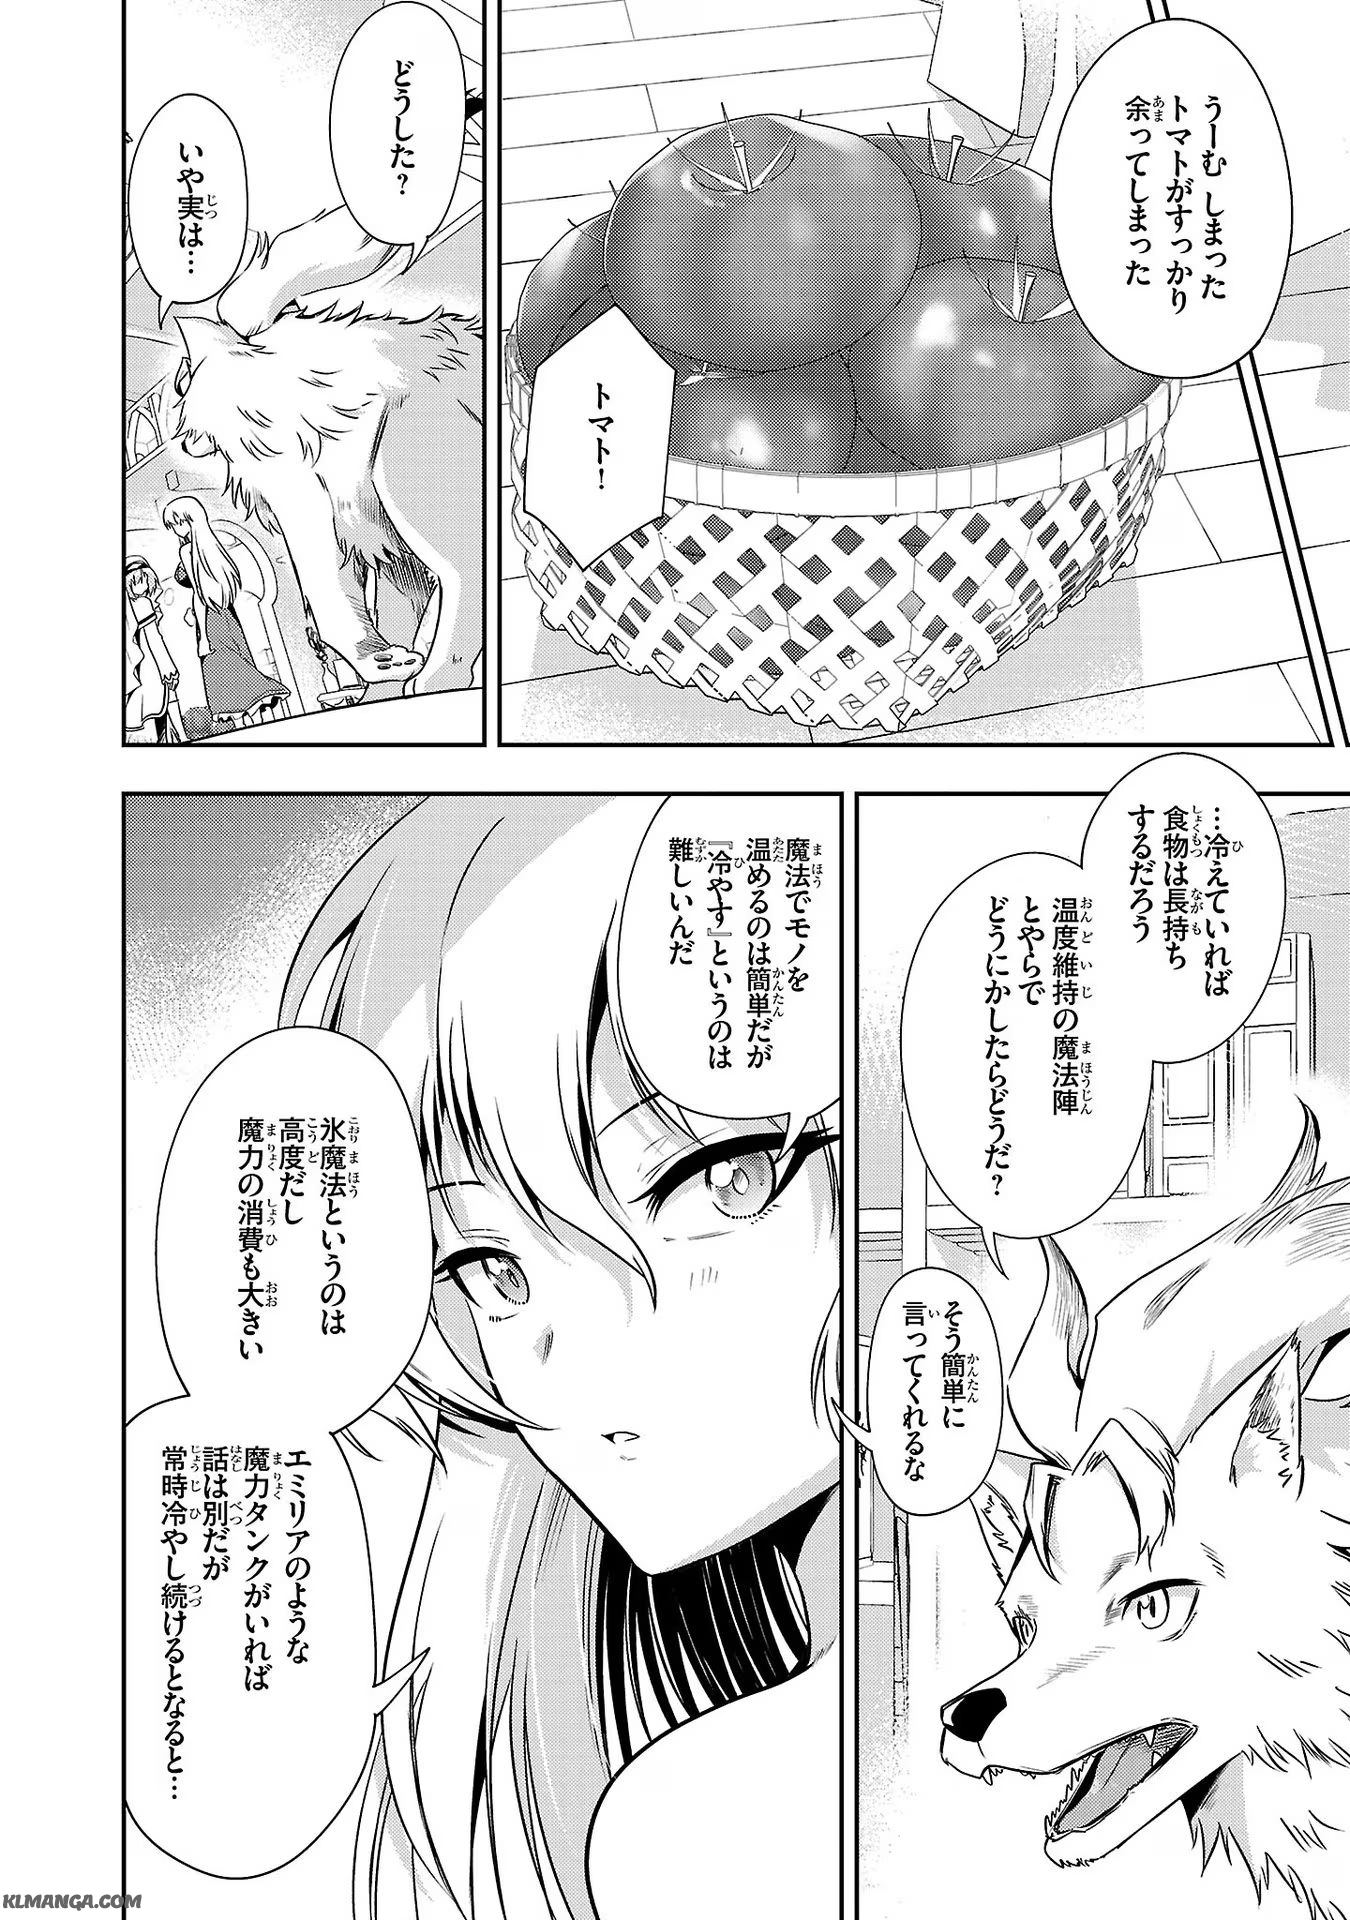 Hungry Saint and Full-Stomach Witch’s Slow Life in Another World! 腹ペコ聖女とまんぷく魔女の異世界スローライフ! 第13話 - Page 10